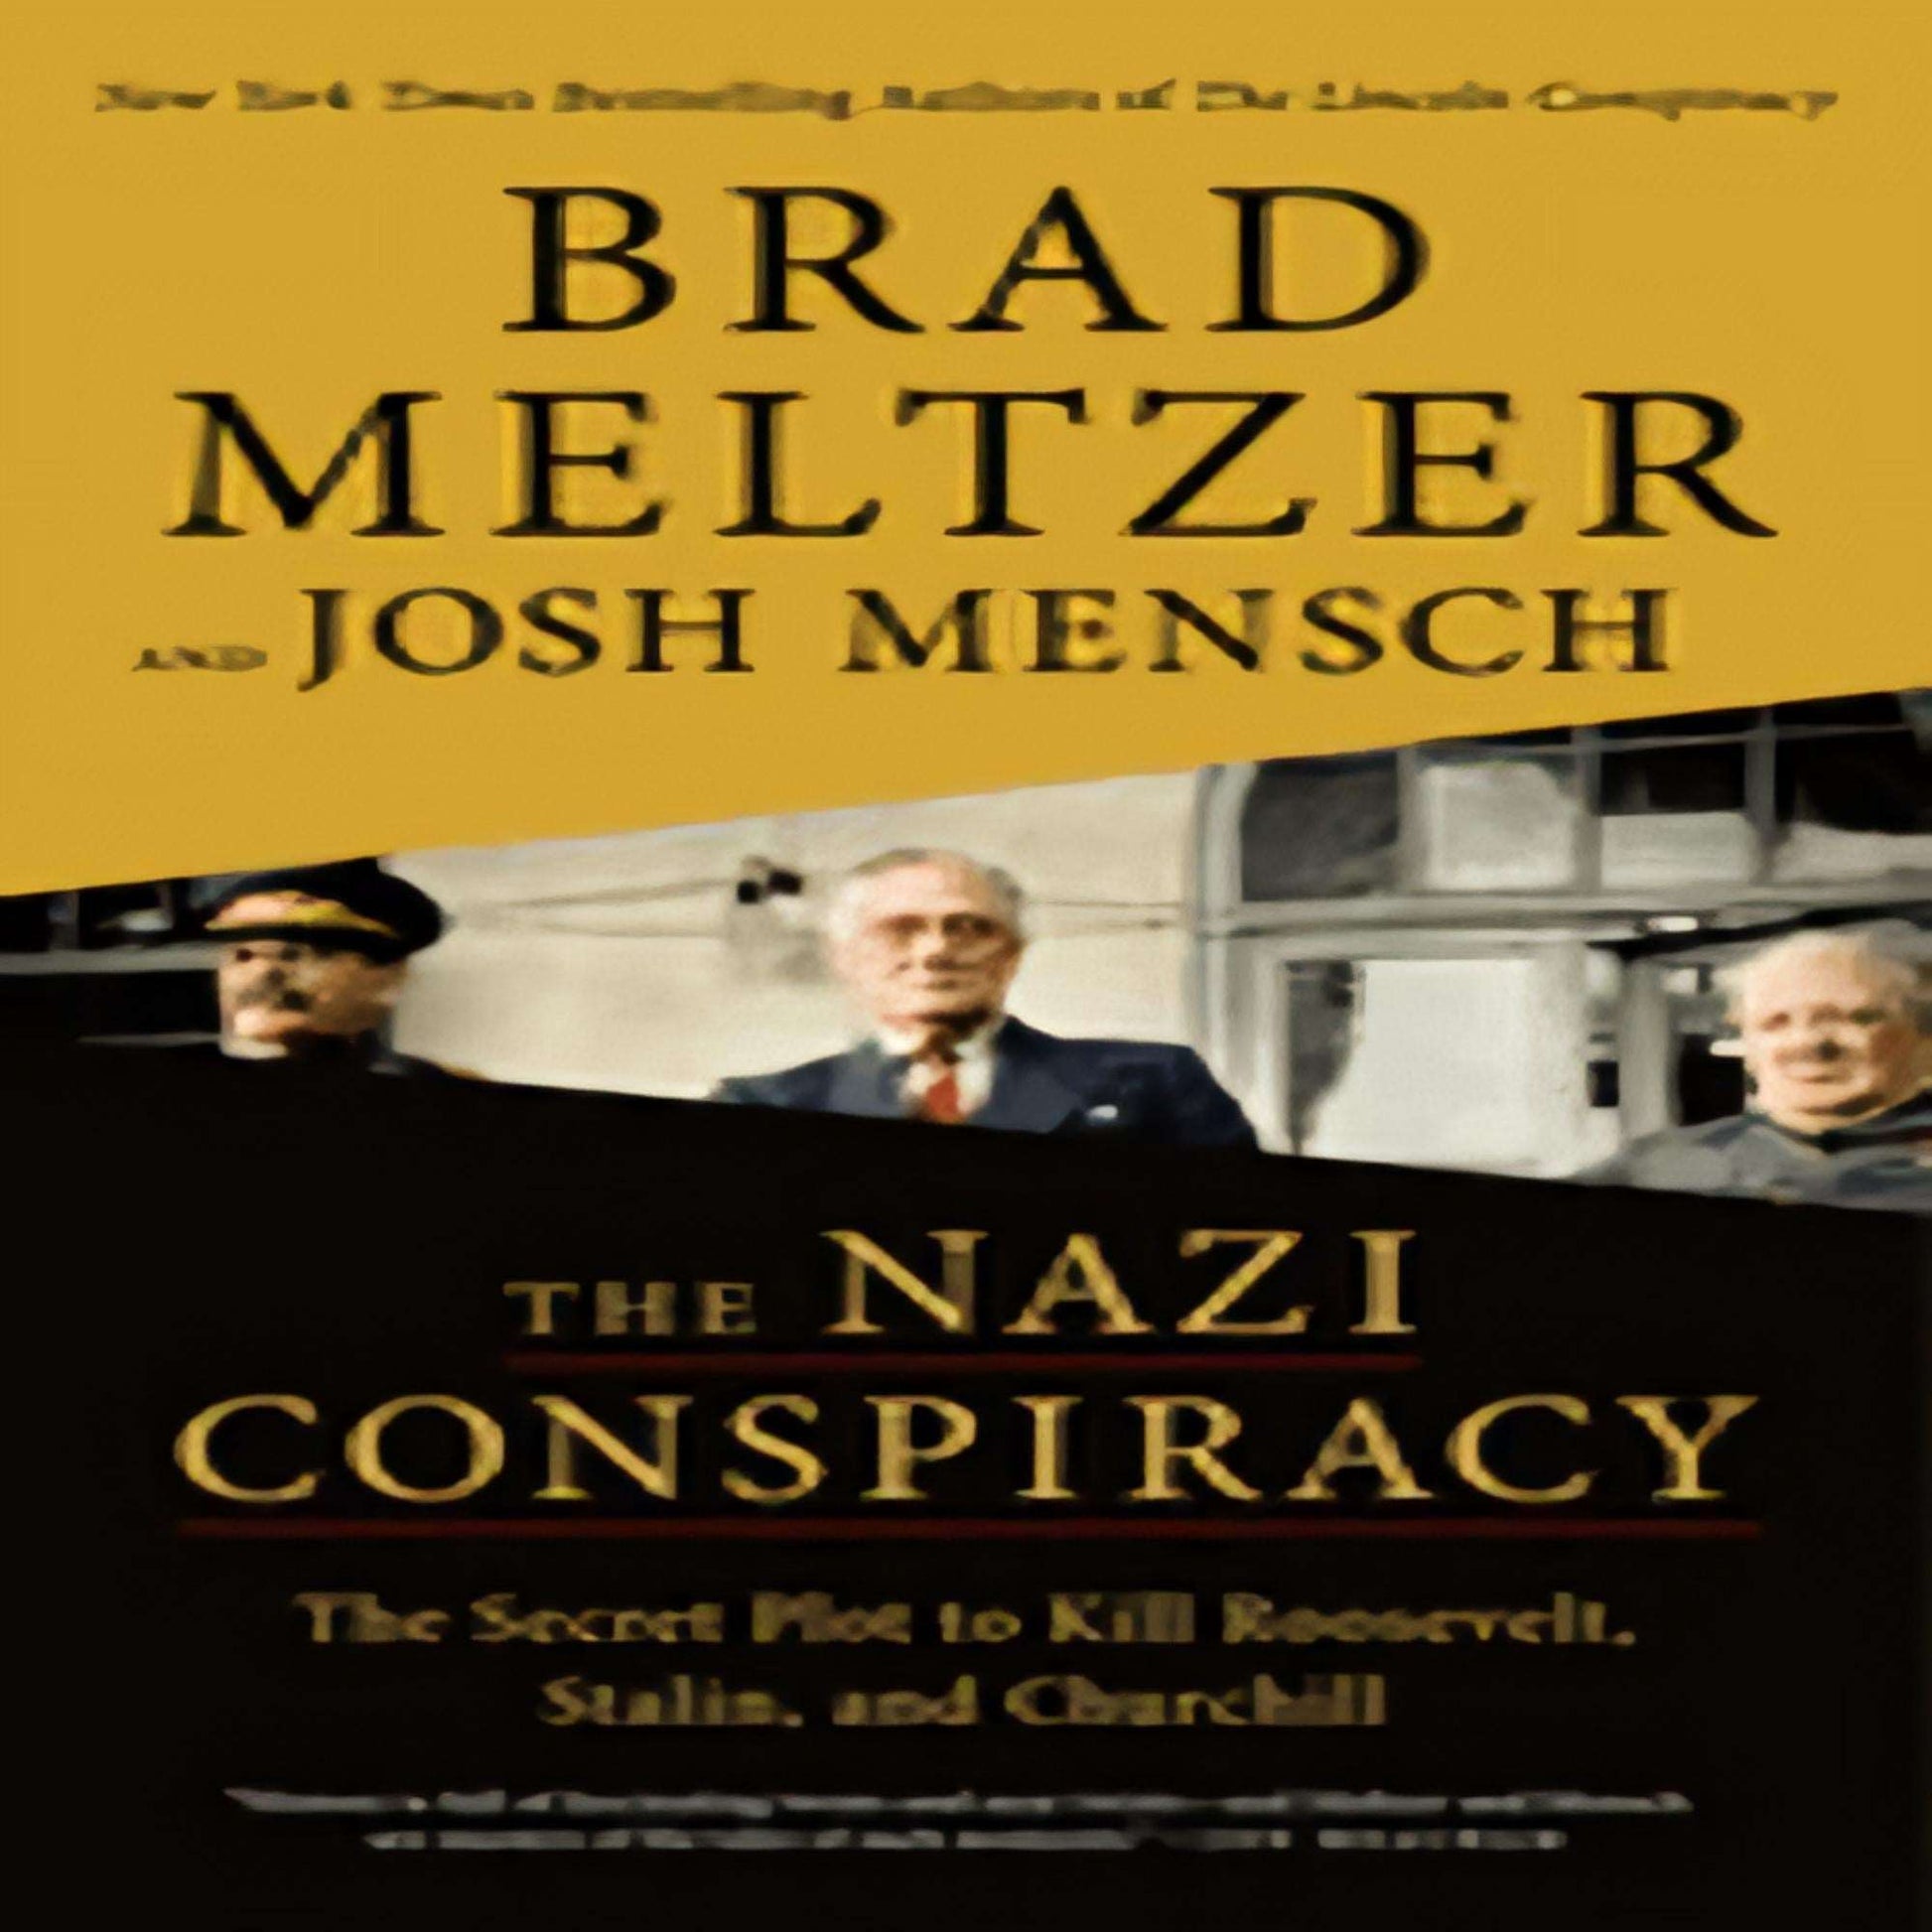 The Nazi Conspiracy: The Secret Plot to Kill Roosevelt, Stalin, and Churchill120-022223-1250777267DPGBOOKSTORE.COM. Today's Bestsellers.